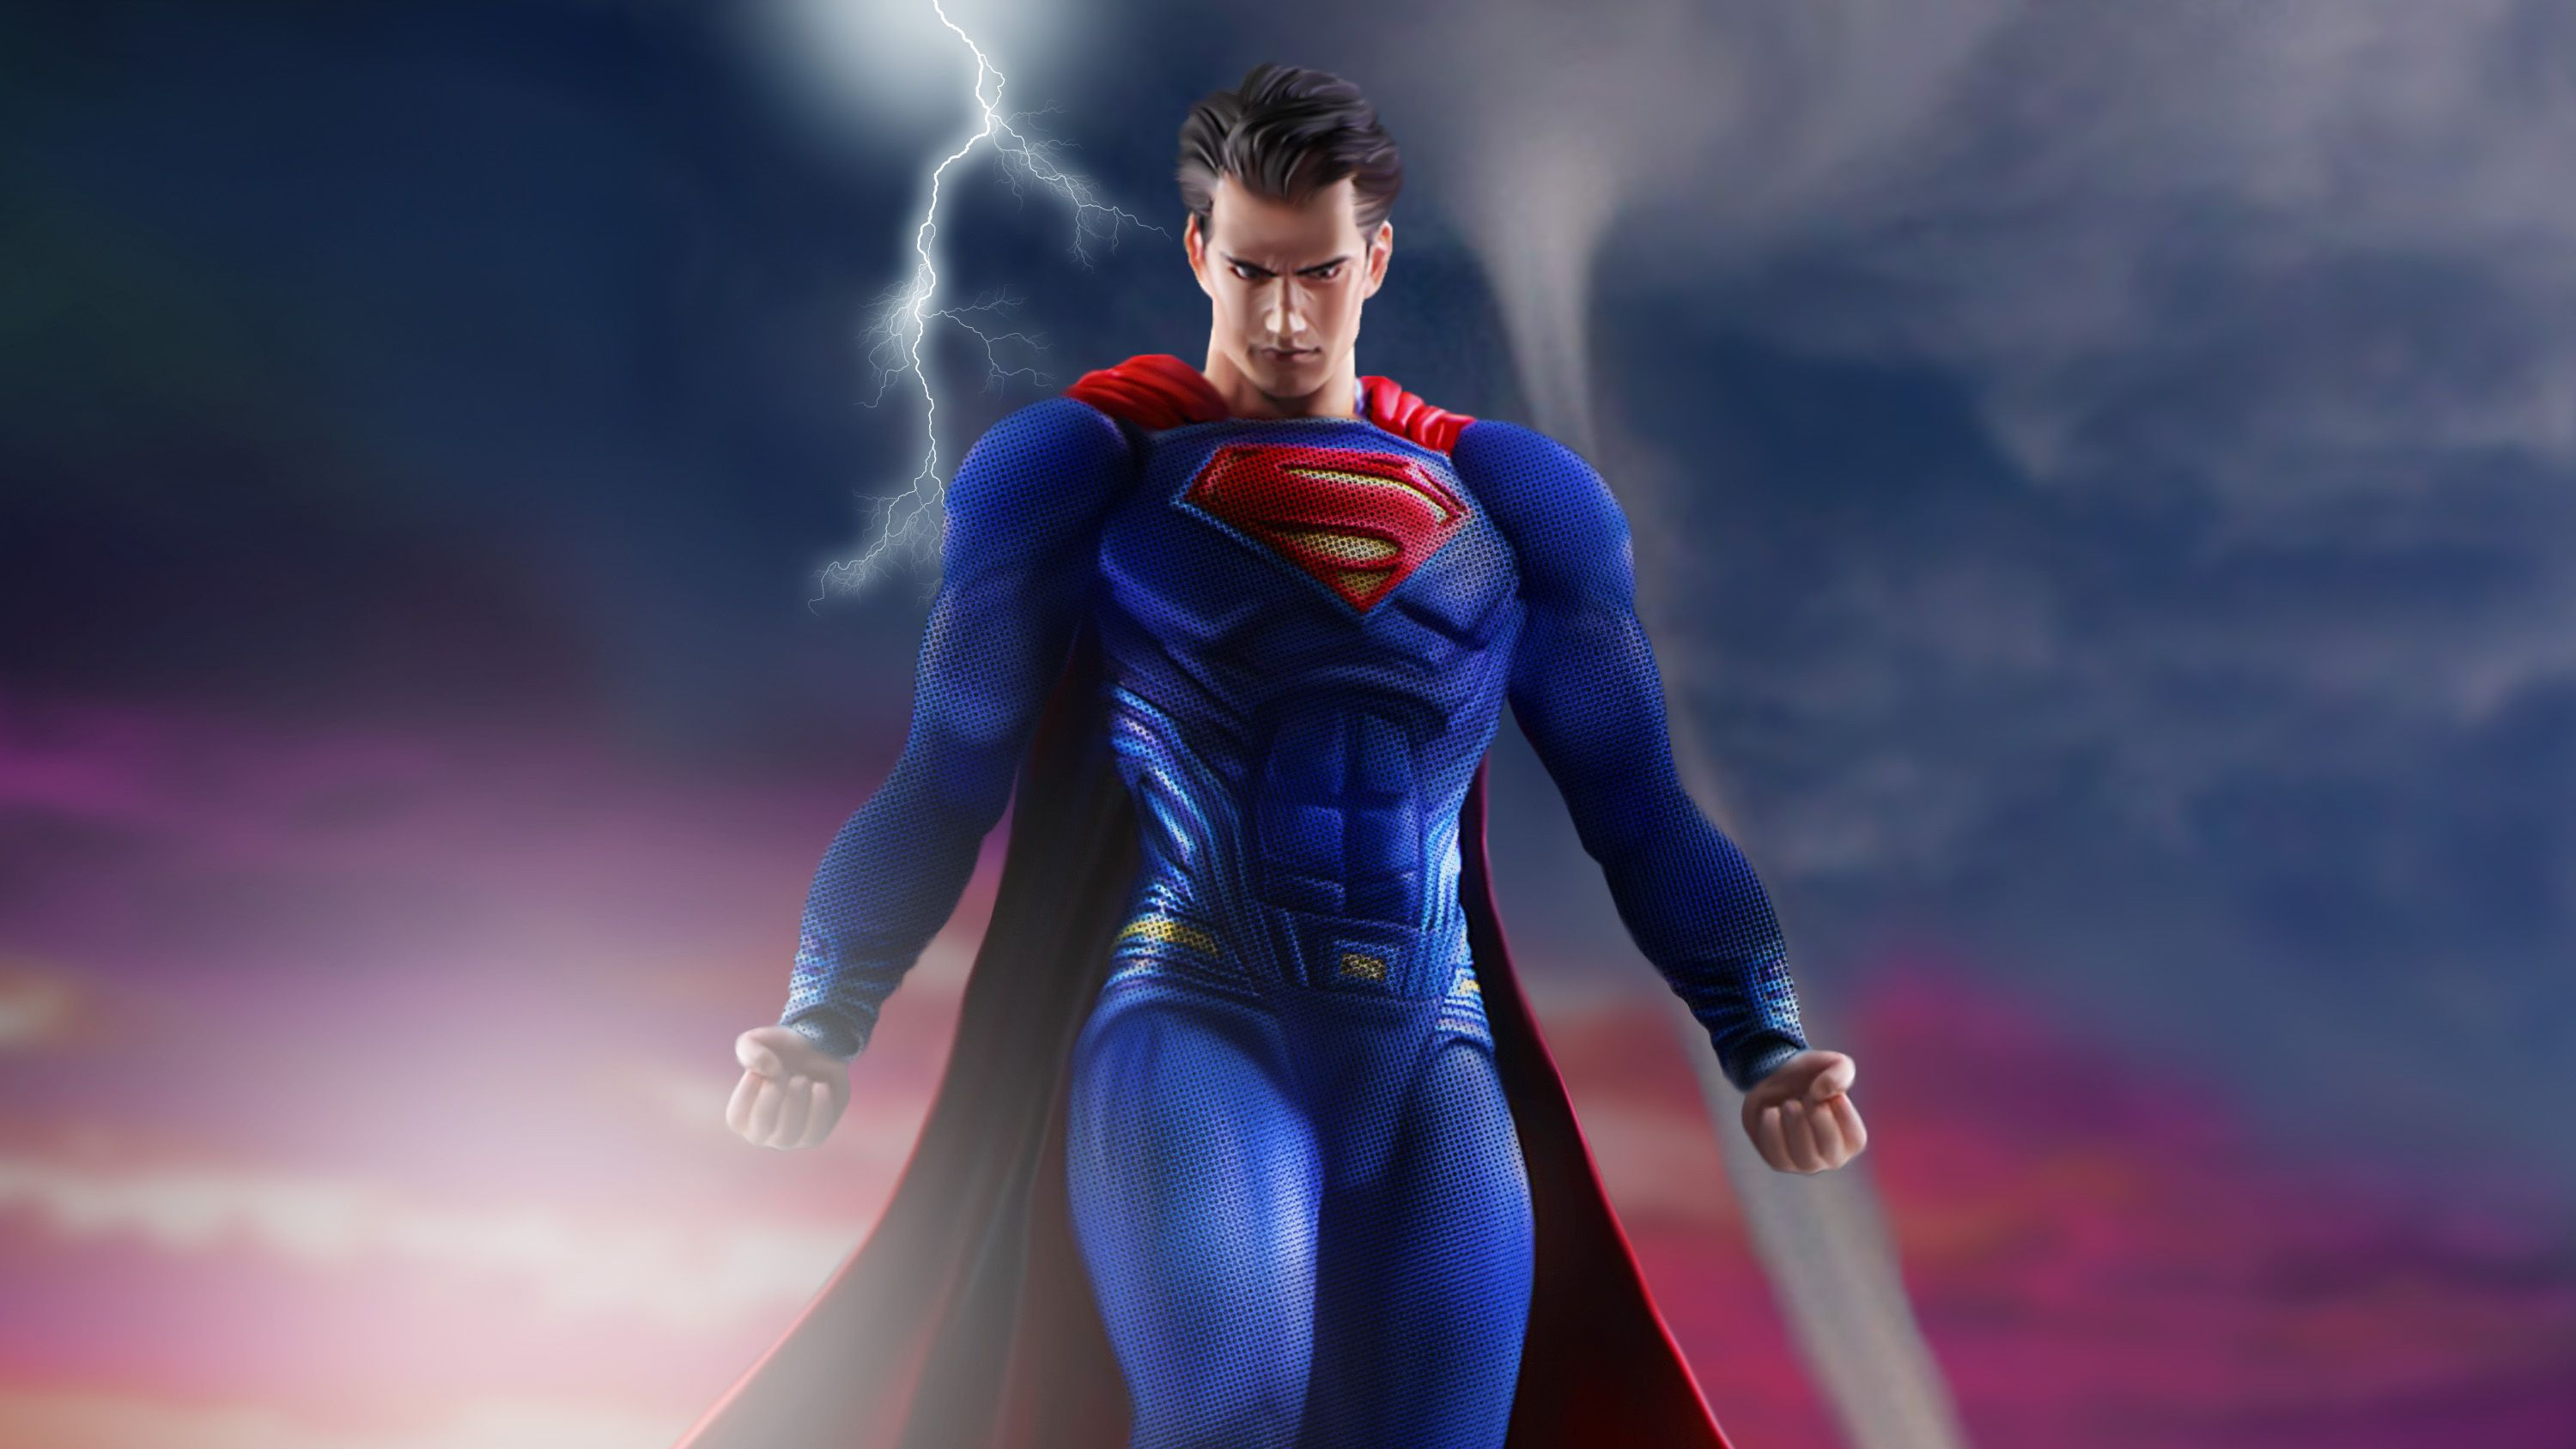 3000x1688 Superman Flying Wallpapers Top Free Superman Flying Backgrounds